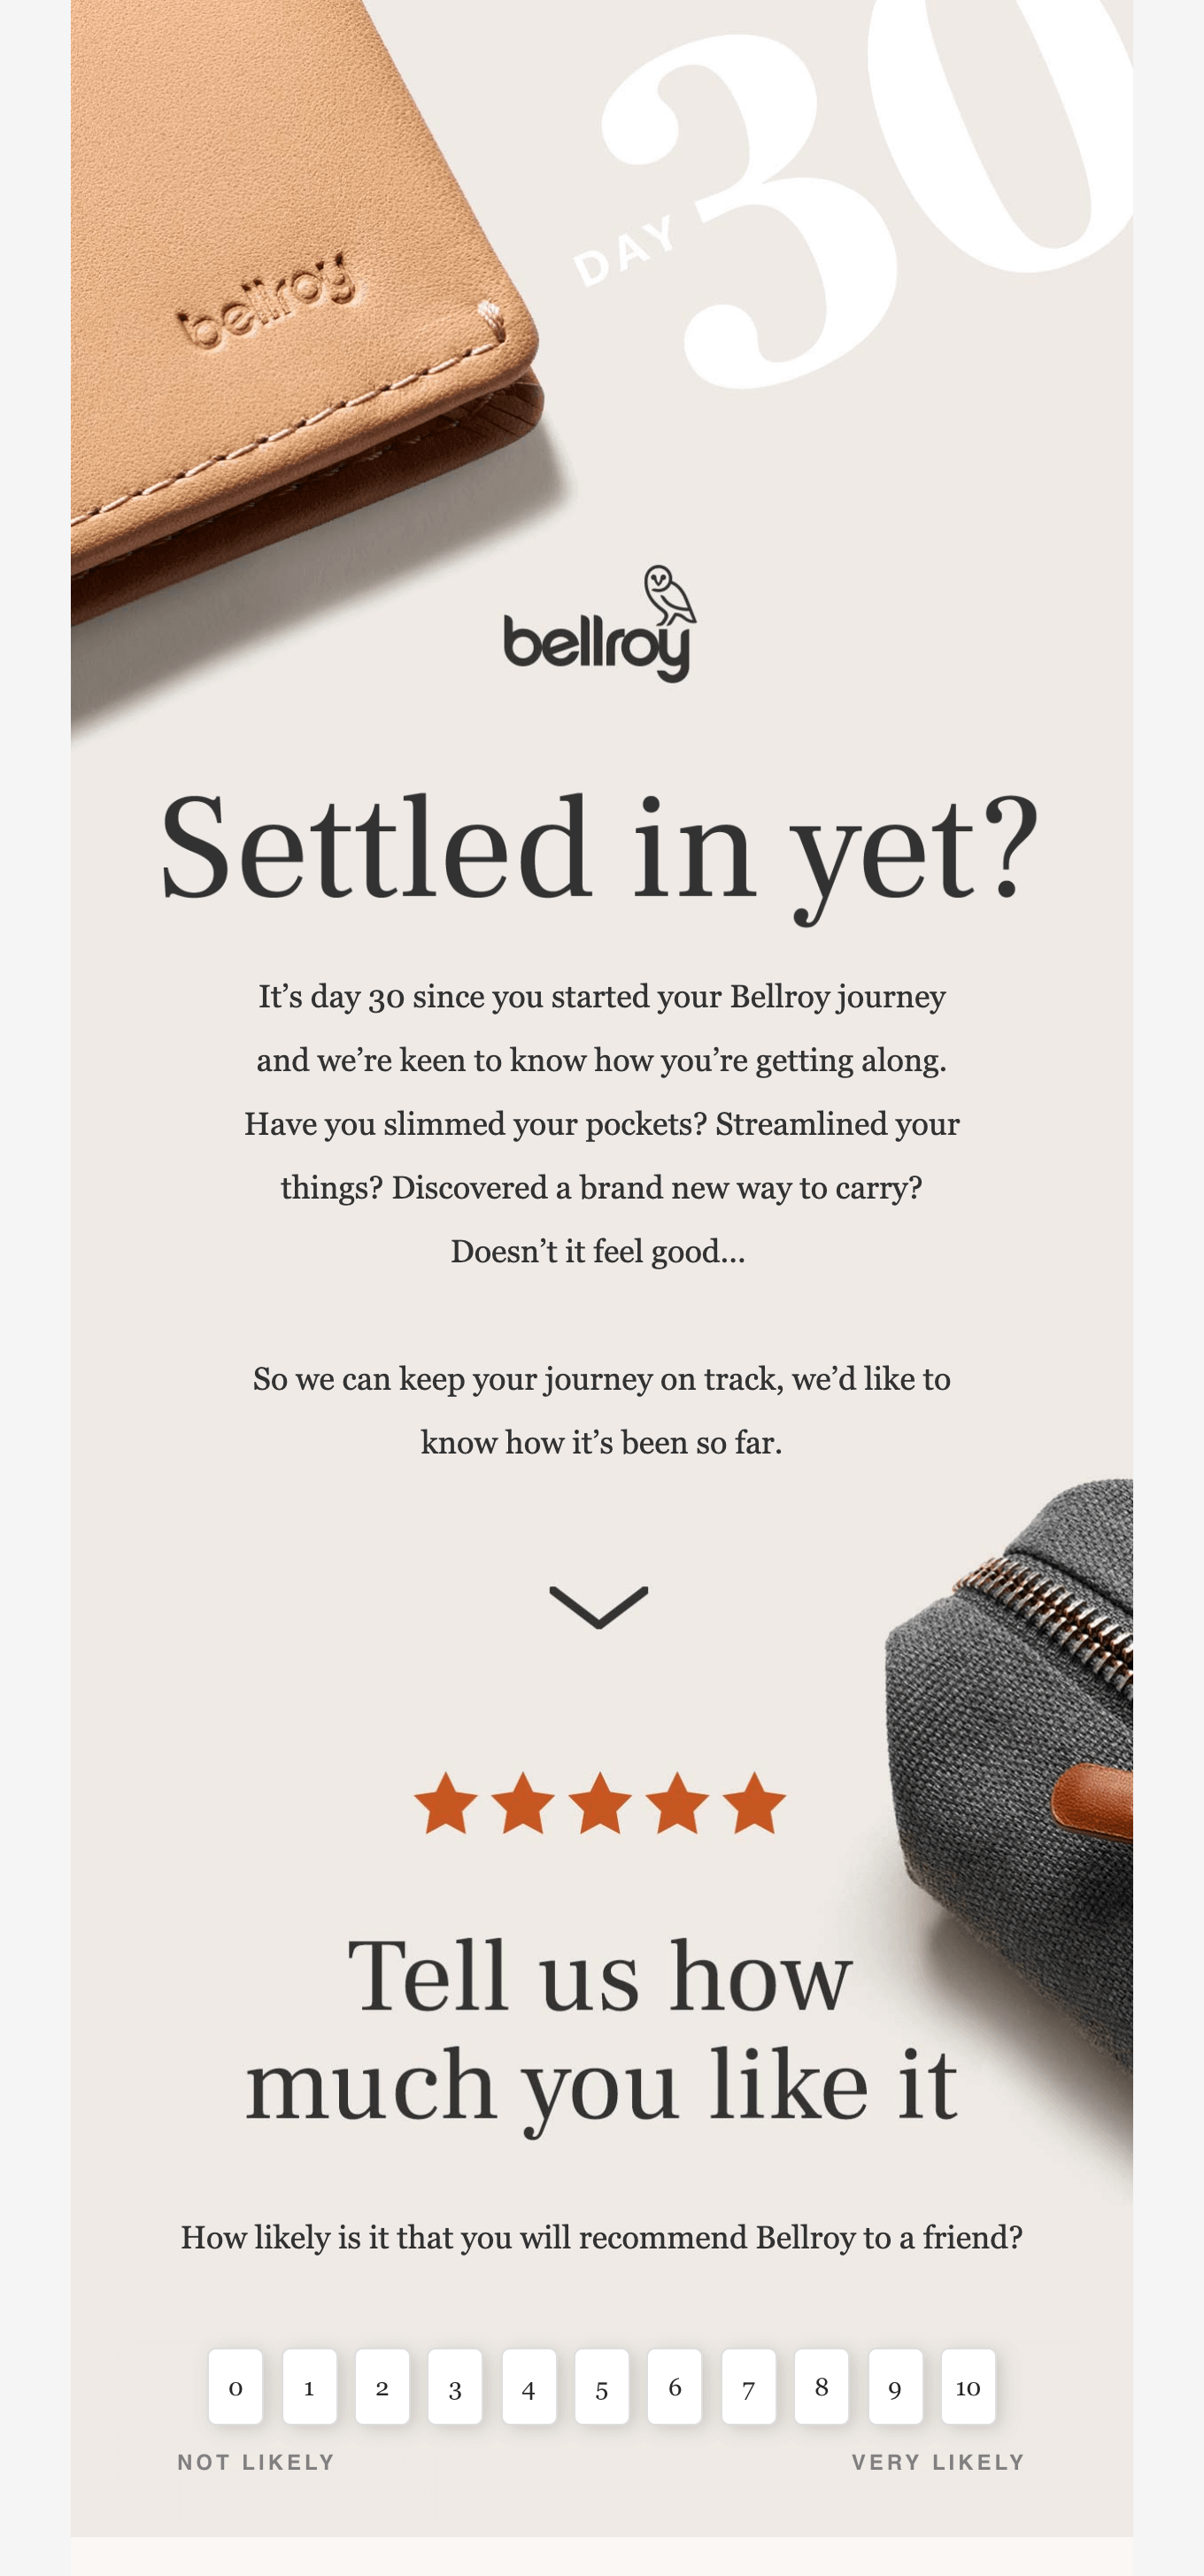 Interactive email from Bellroy with a 1 to 10 clickable number buttons to rate the product